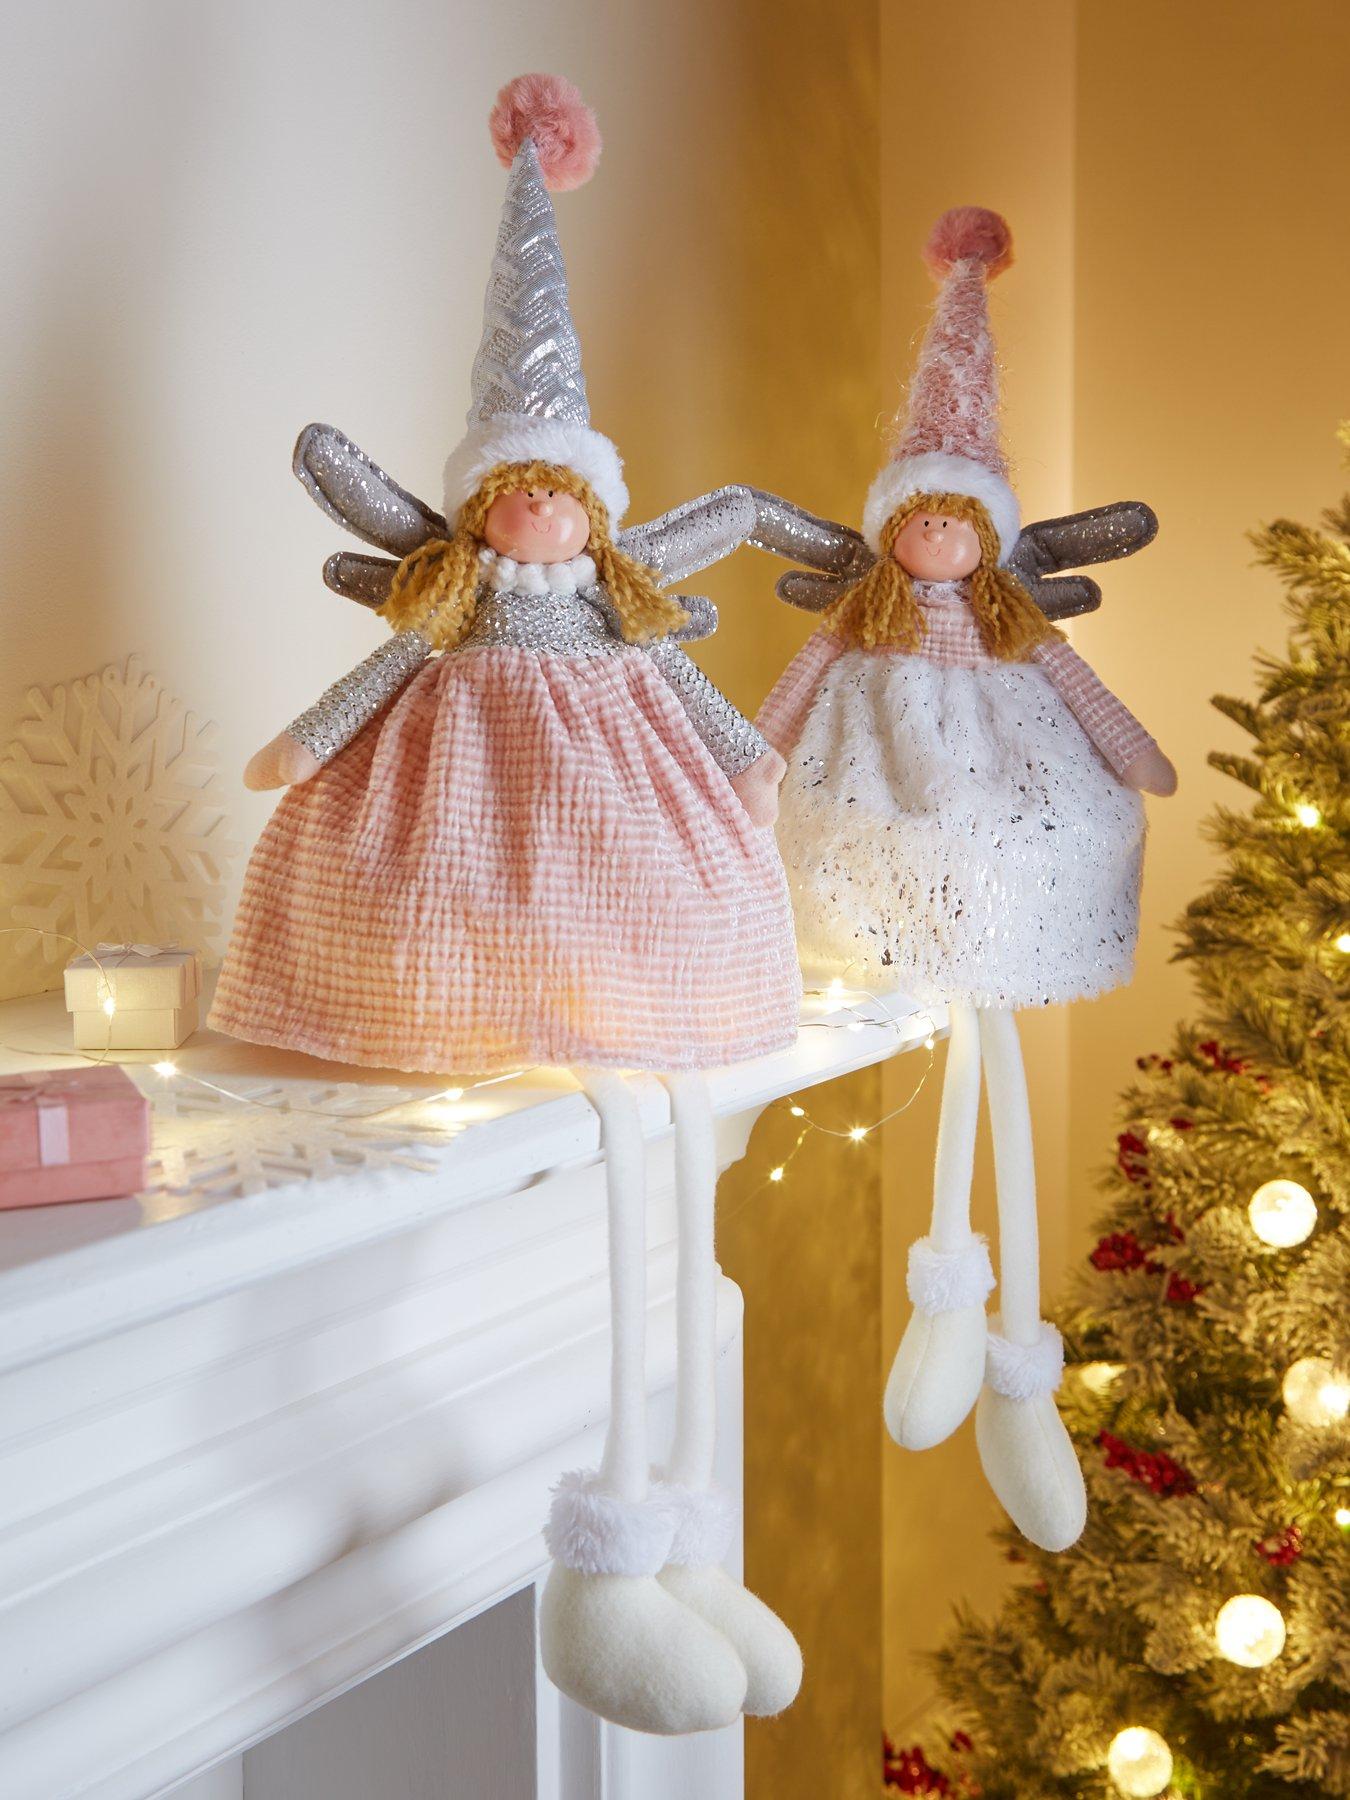 Set of 2 Fairies with Dangly Legs Christmas Decorations